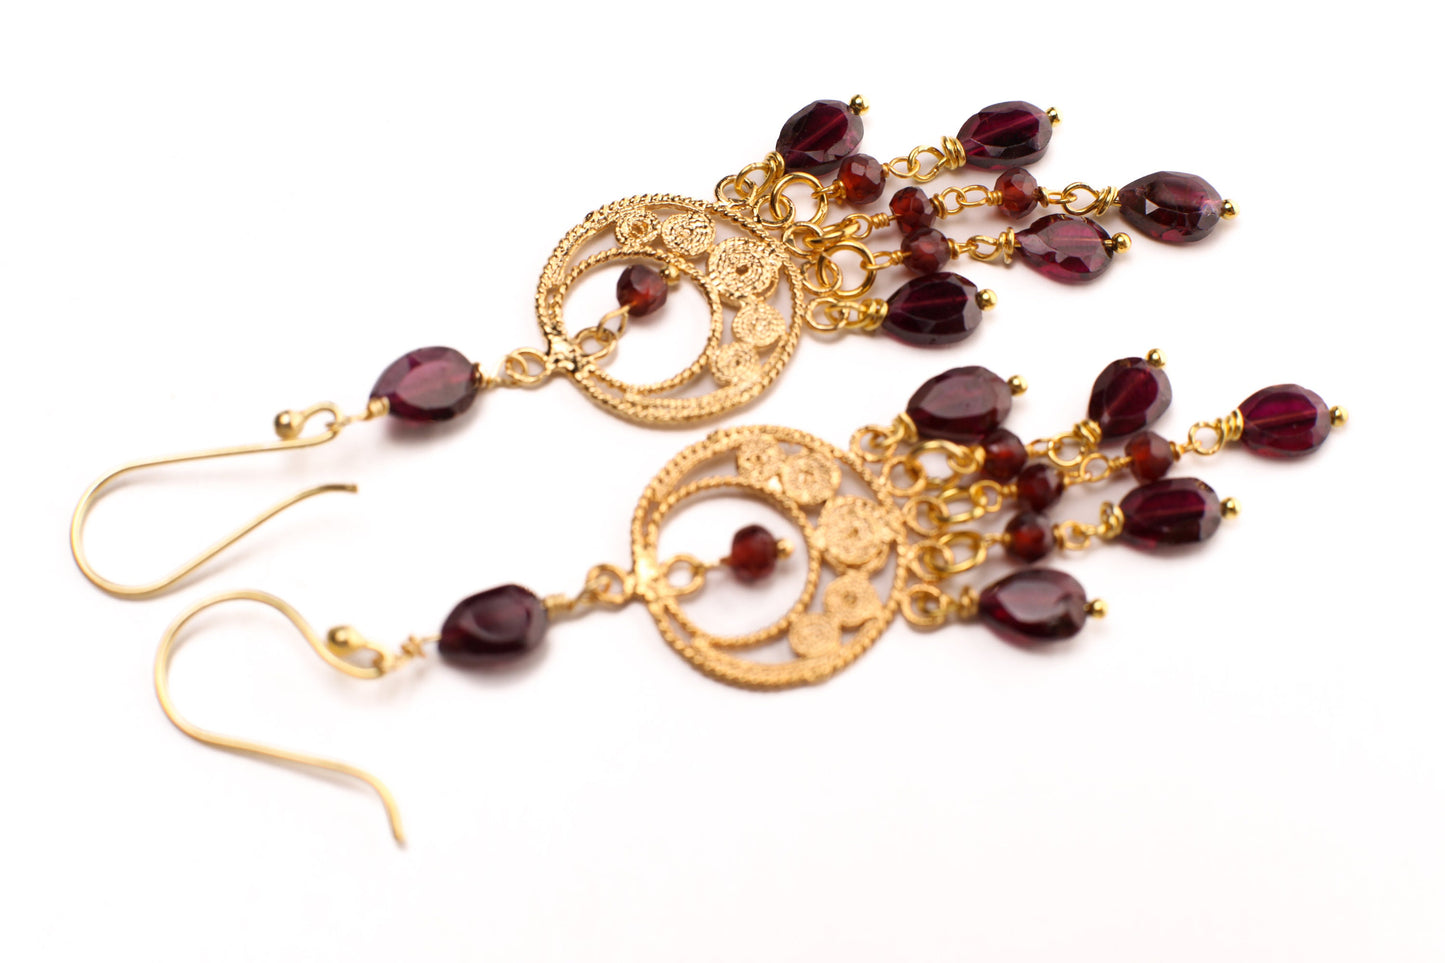 Genuine Garnet Dangling Wire Wrapped Oval Chandelier in 14K Gold Vermeil Ear wire, January Birthstone, Precious Gift for her